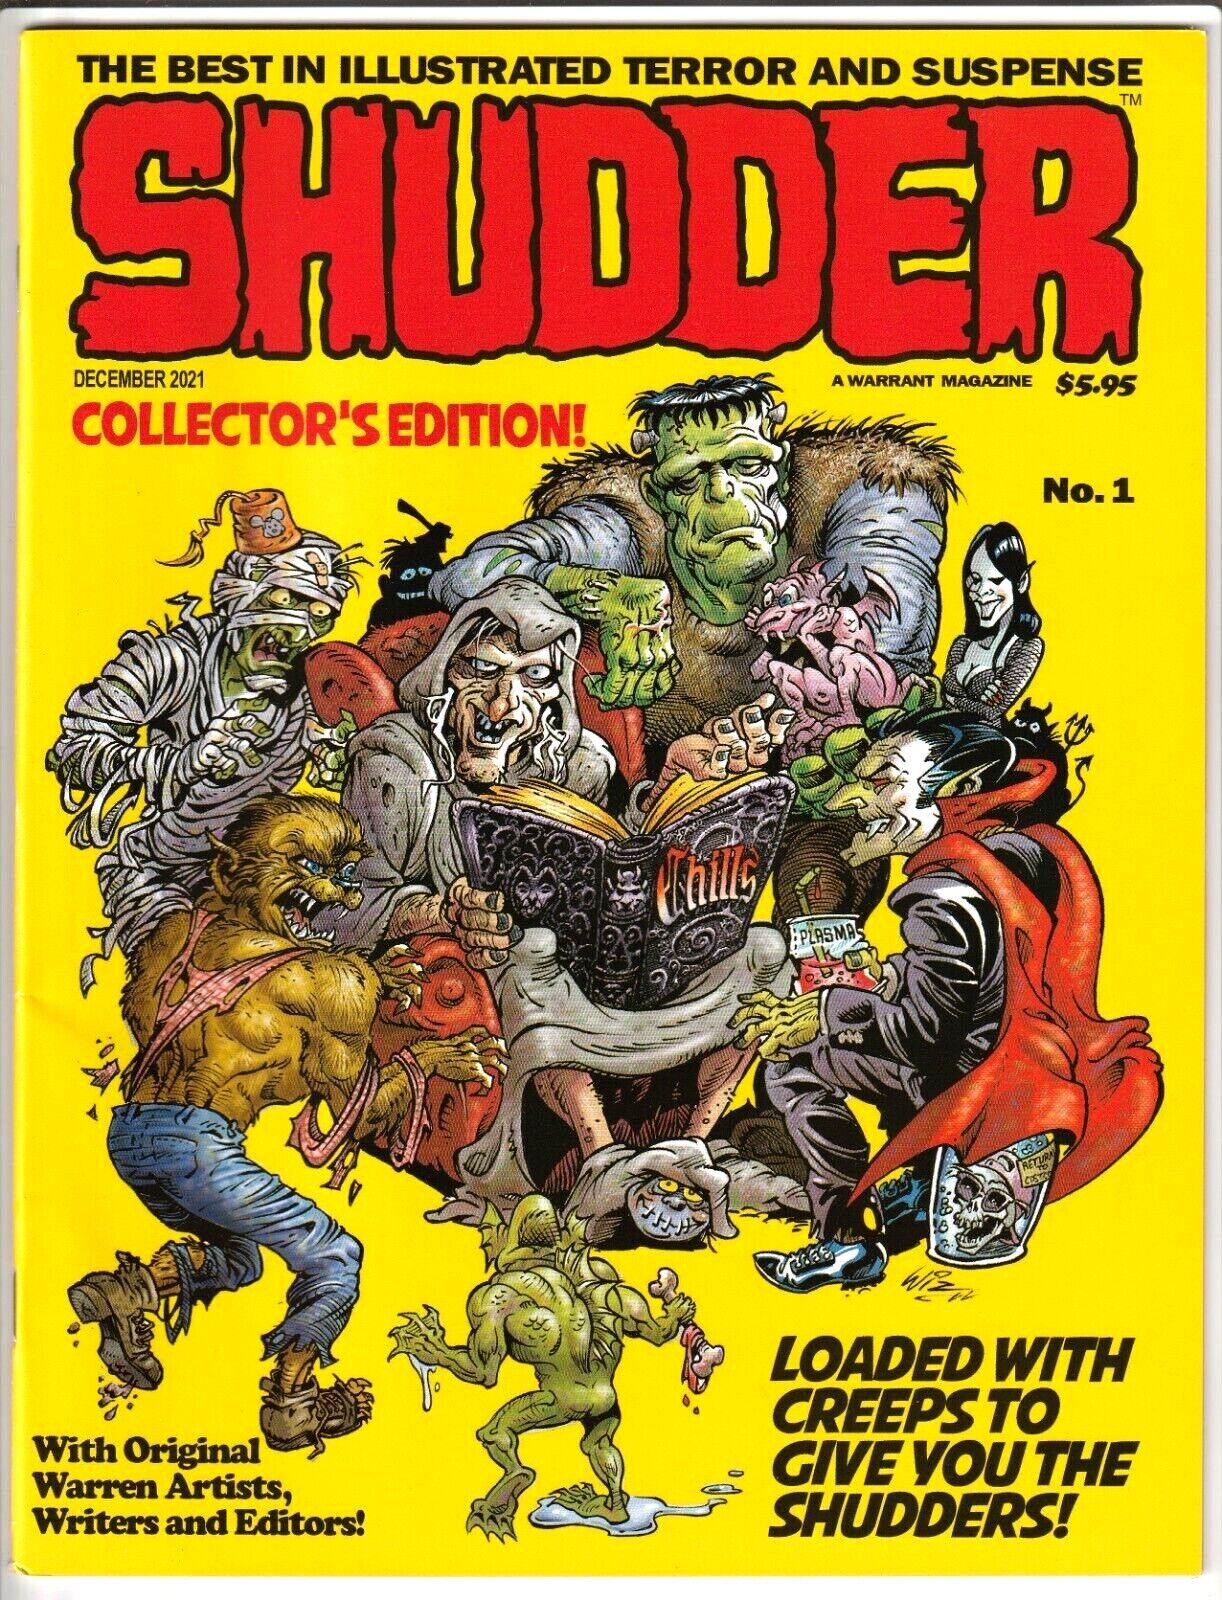 SHUDDER MAGAZINE ISSUES #1 - 16 & ANNUALS NEW UNREAD COPIES  - YOU PICK